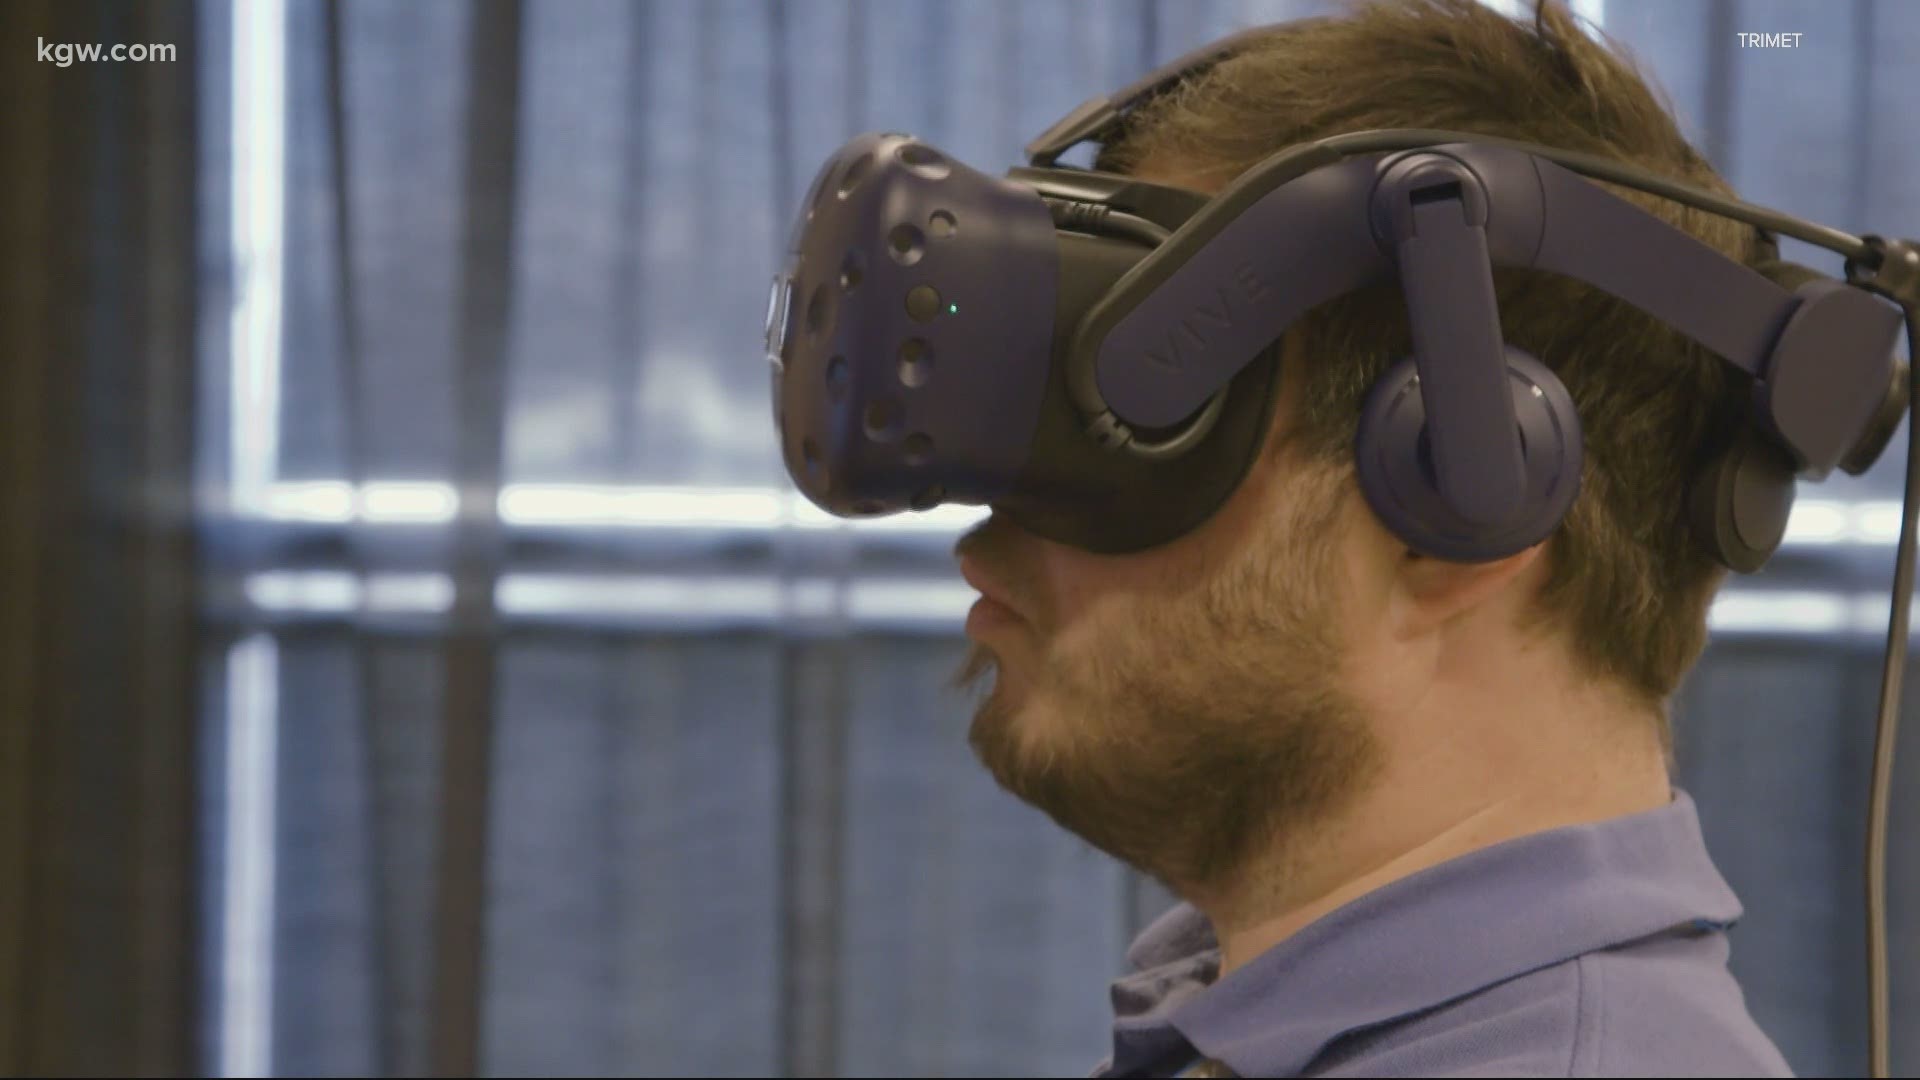 Trimet is one of the first major transit agencies in the US to use virtual reality to help train MAX operators.